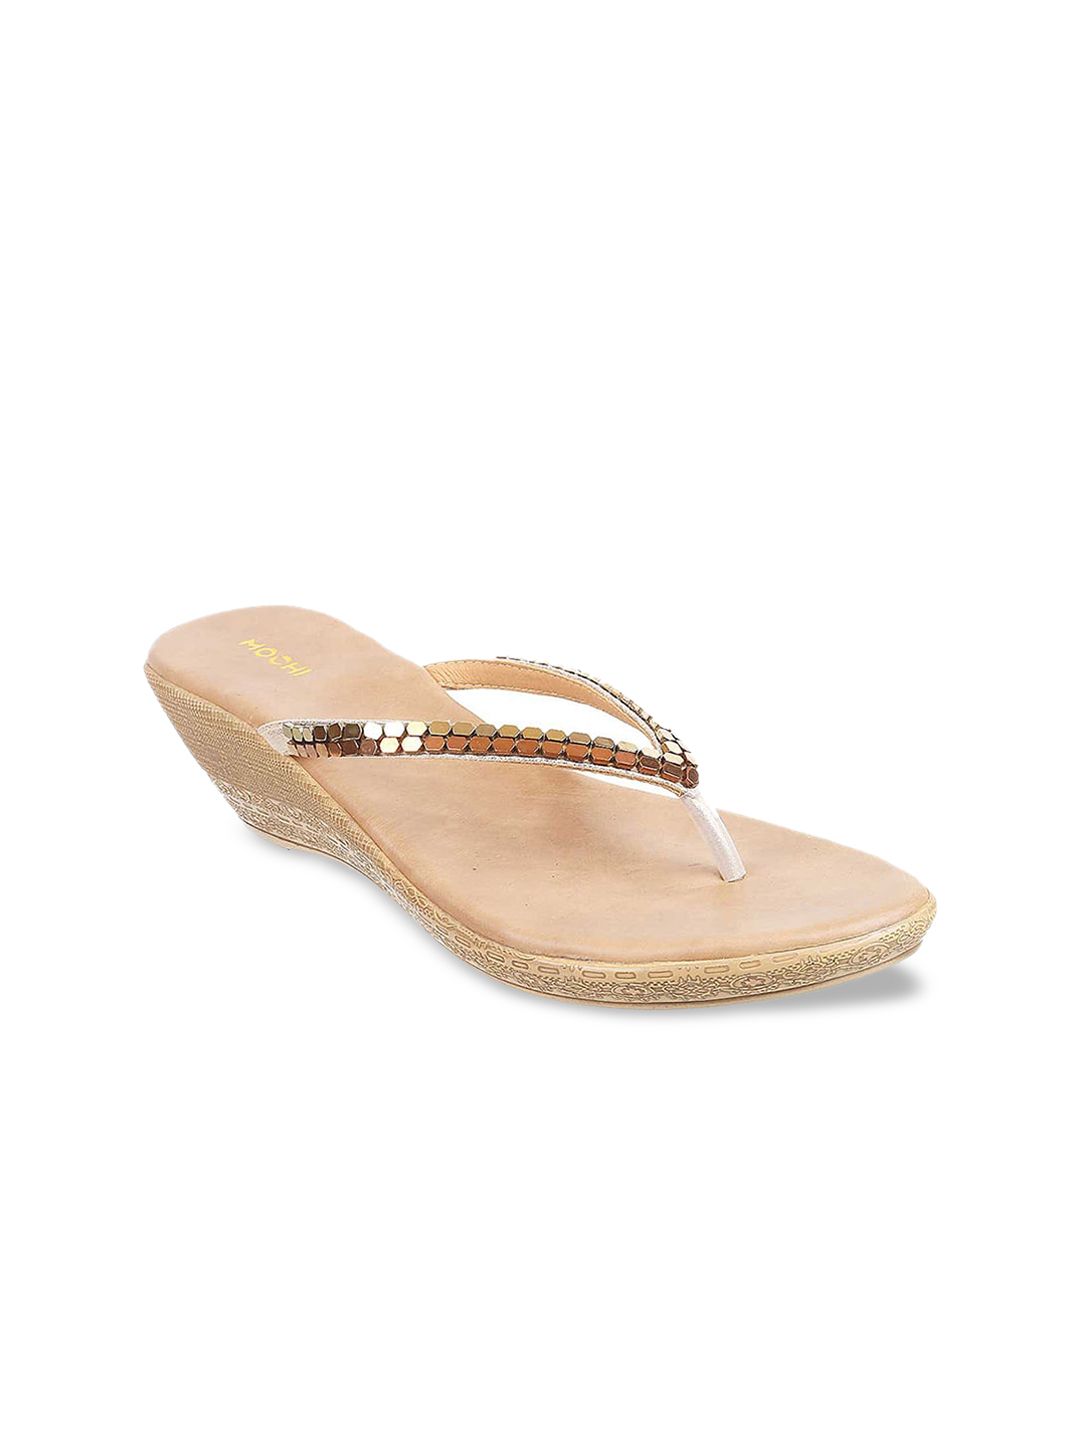 Mochi Women Gold-Toned Embellished Sandals Price in India